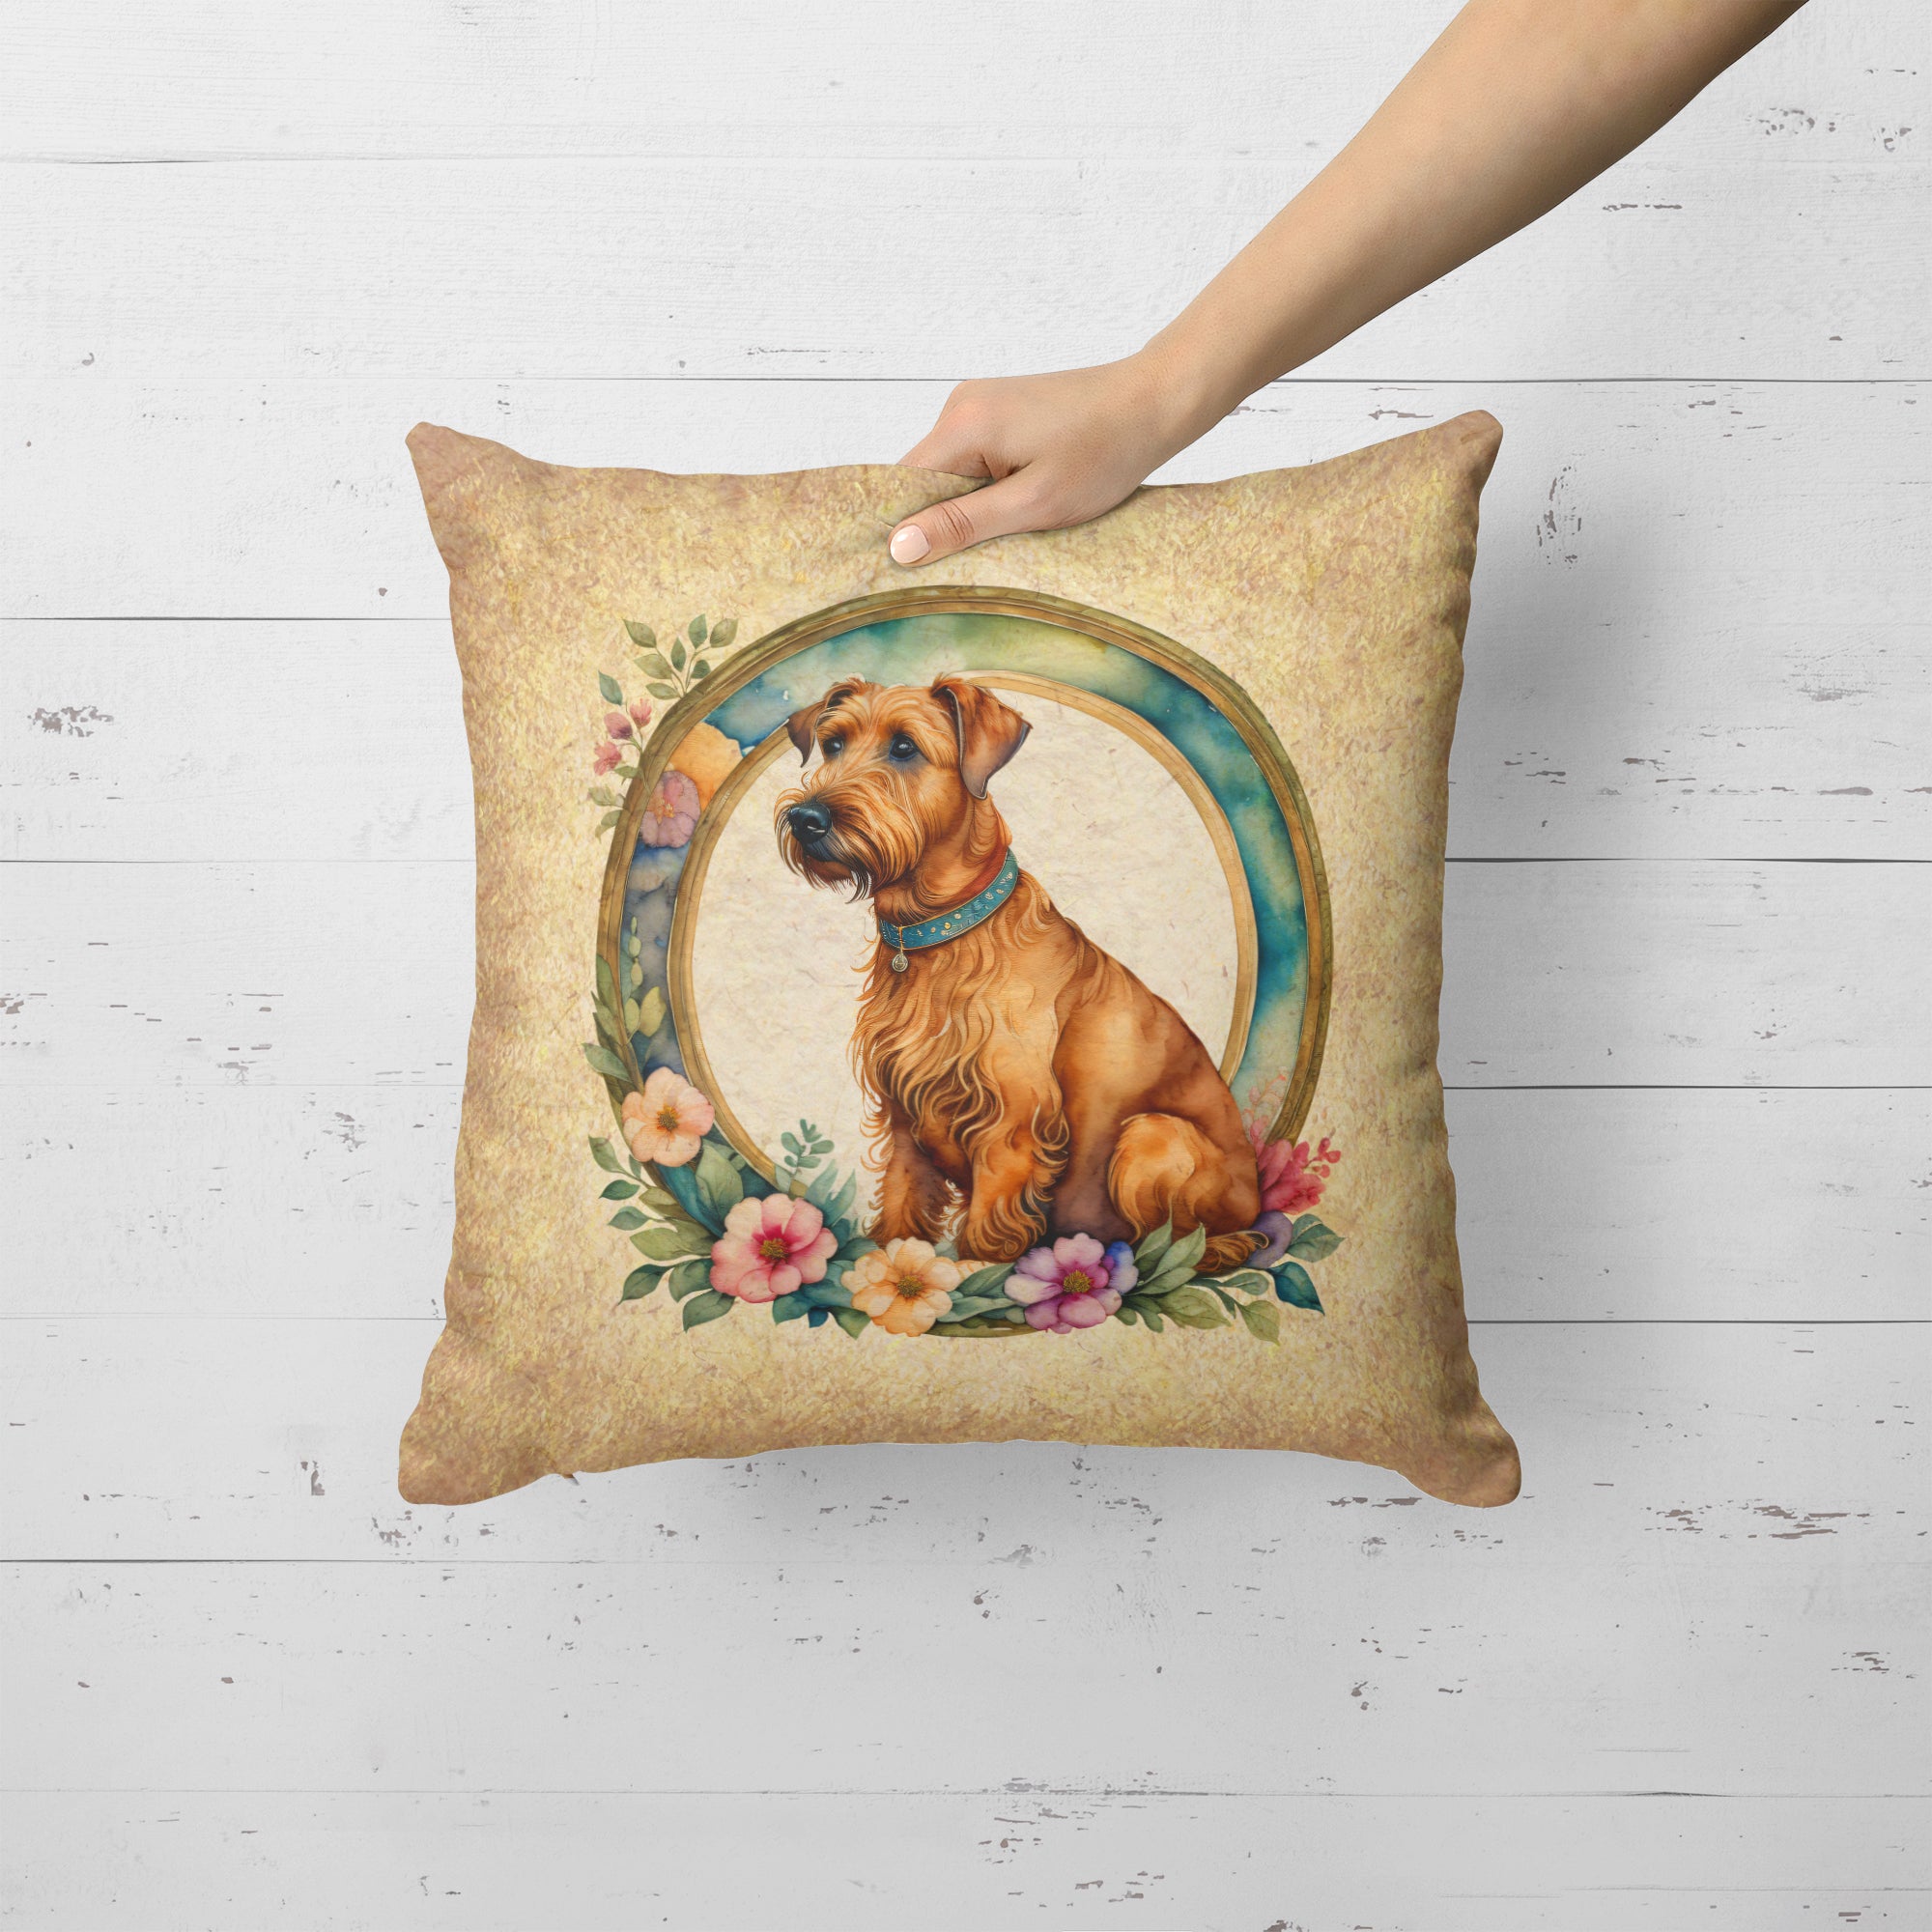 Buy this Irish Terrier and Flowers Fabric Decorative Pillow